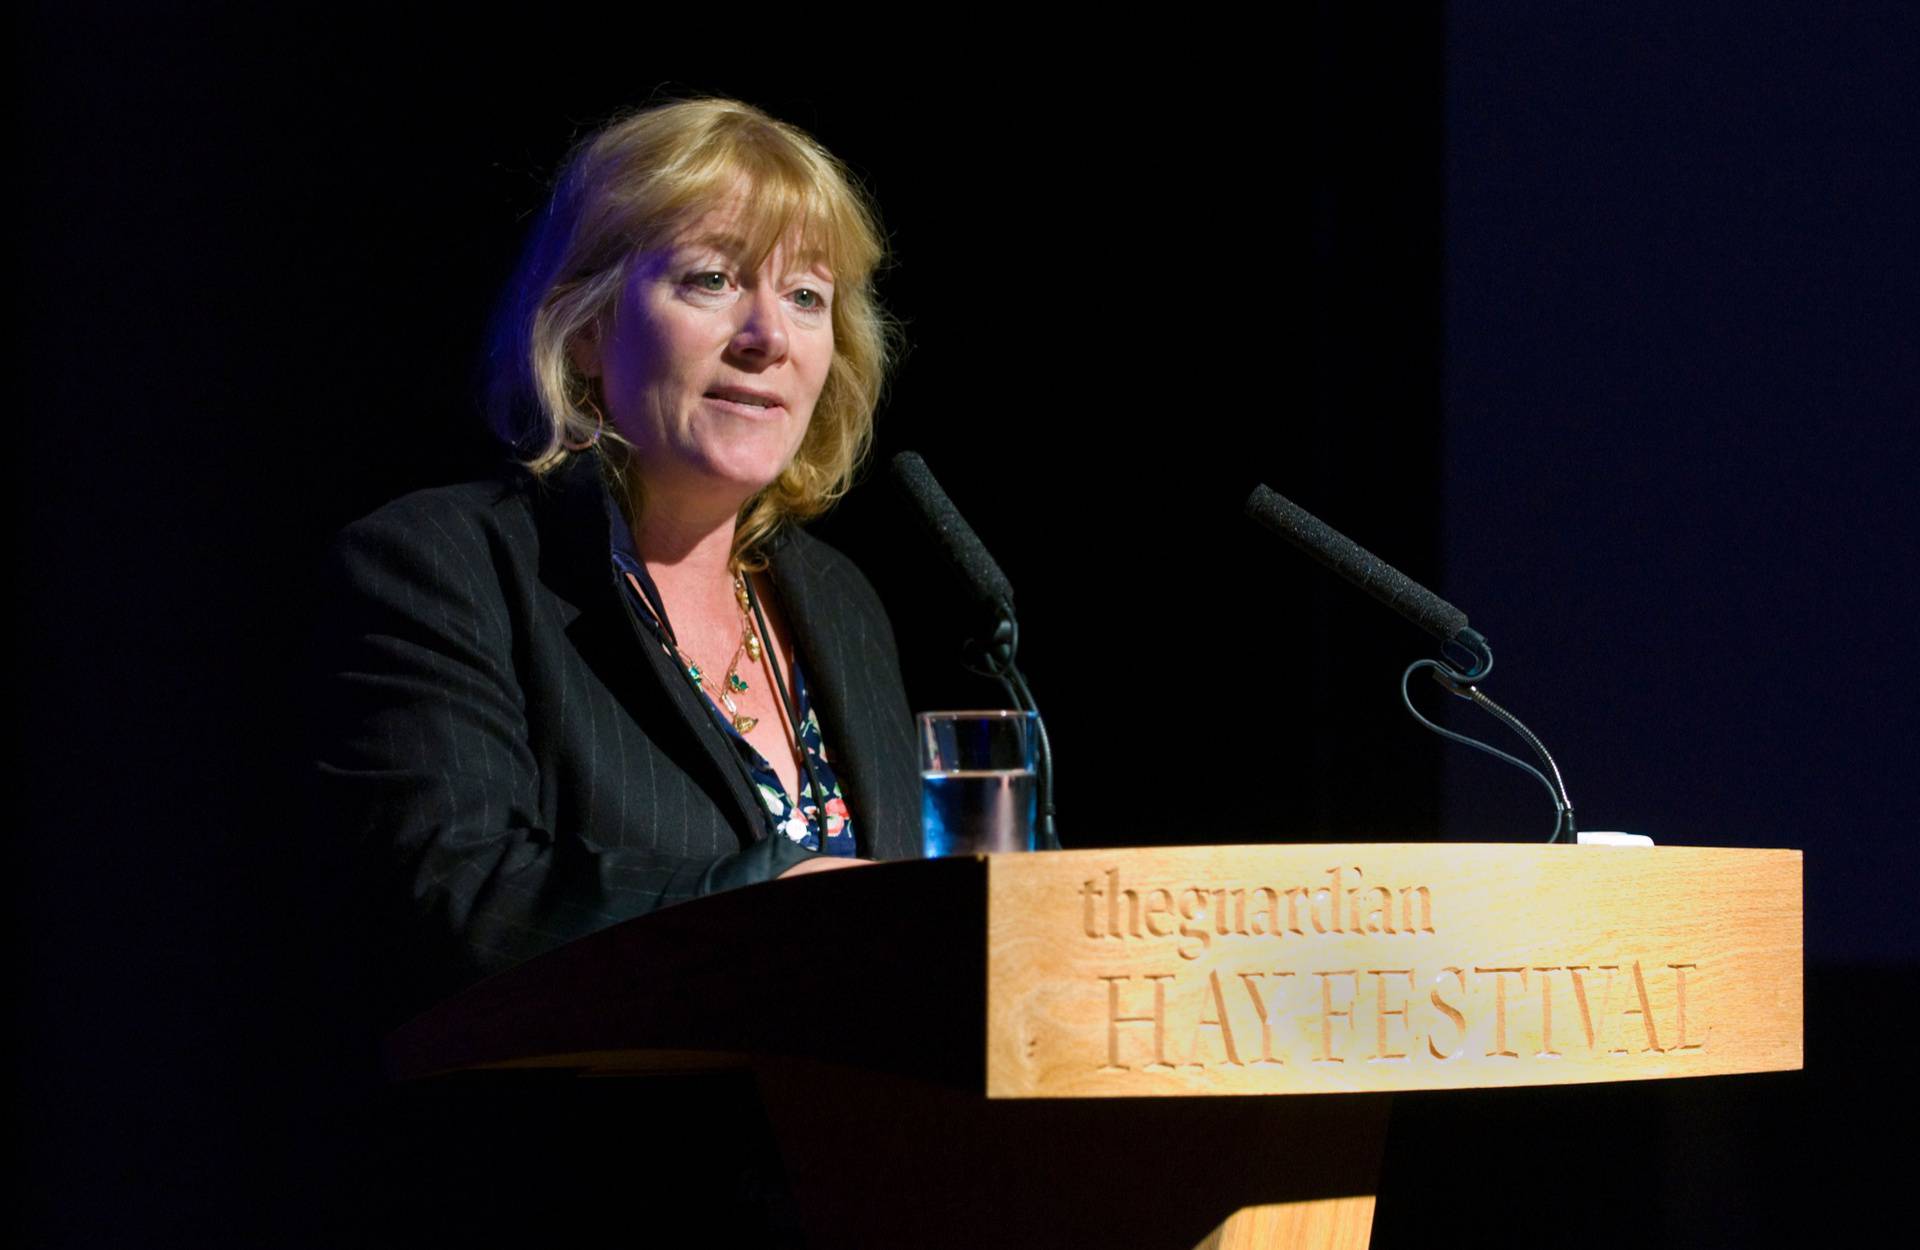 Documentary filmaker and writer Hannah Rothschild pictured speaking at Hay Festival 2009